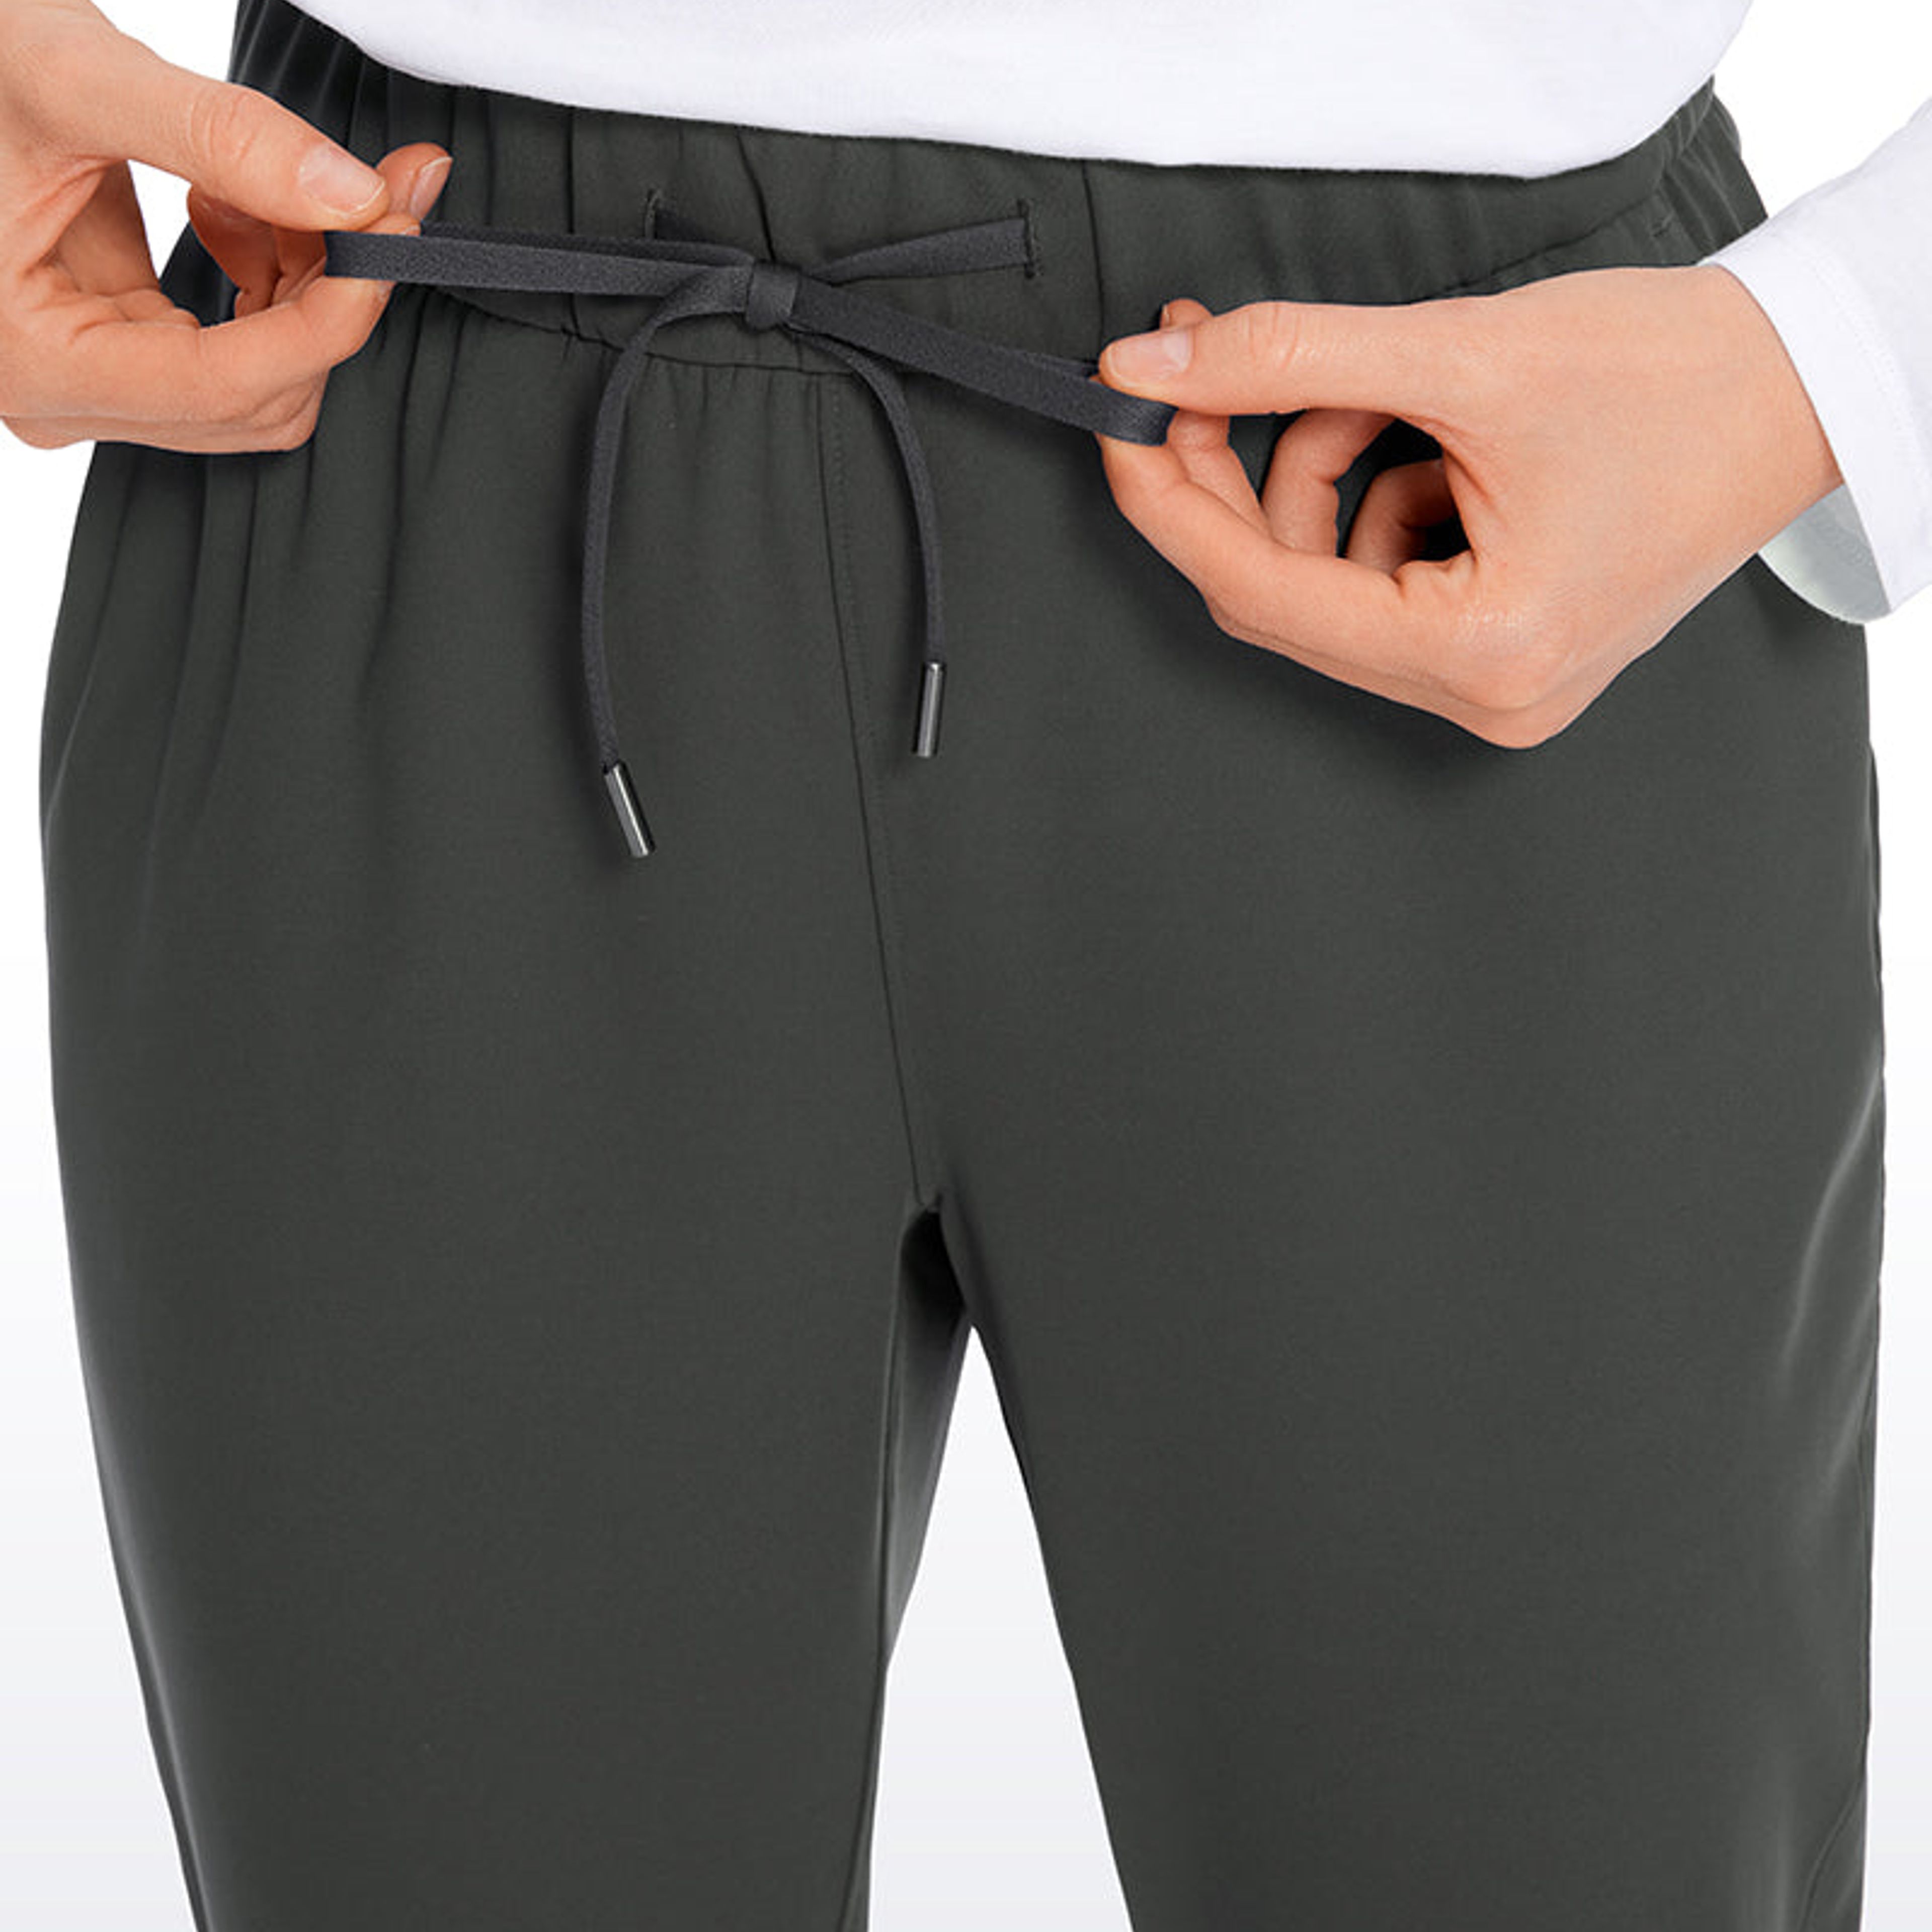 CRZ YOGA Casual Travel Pants for Women